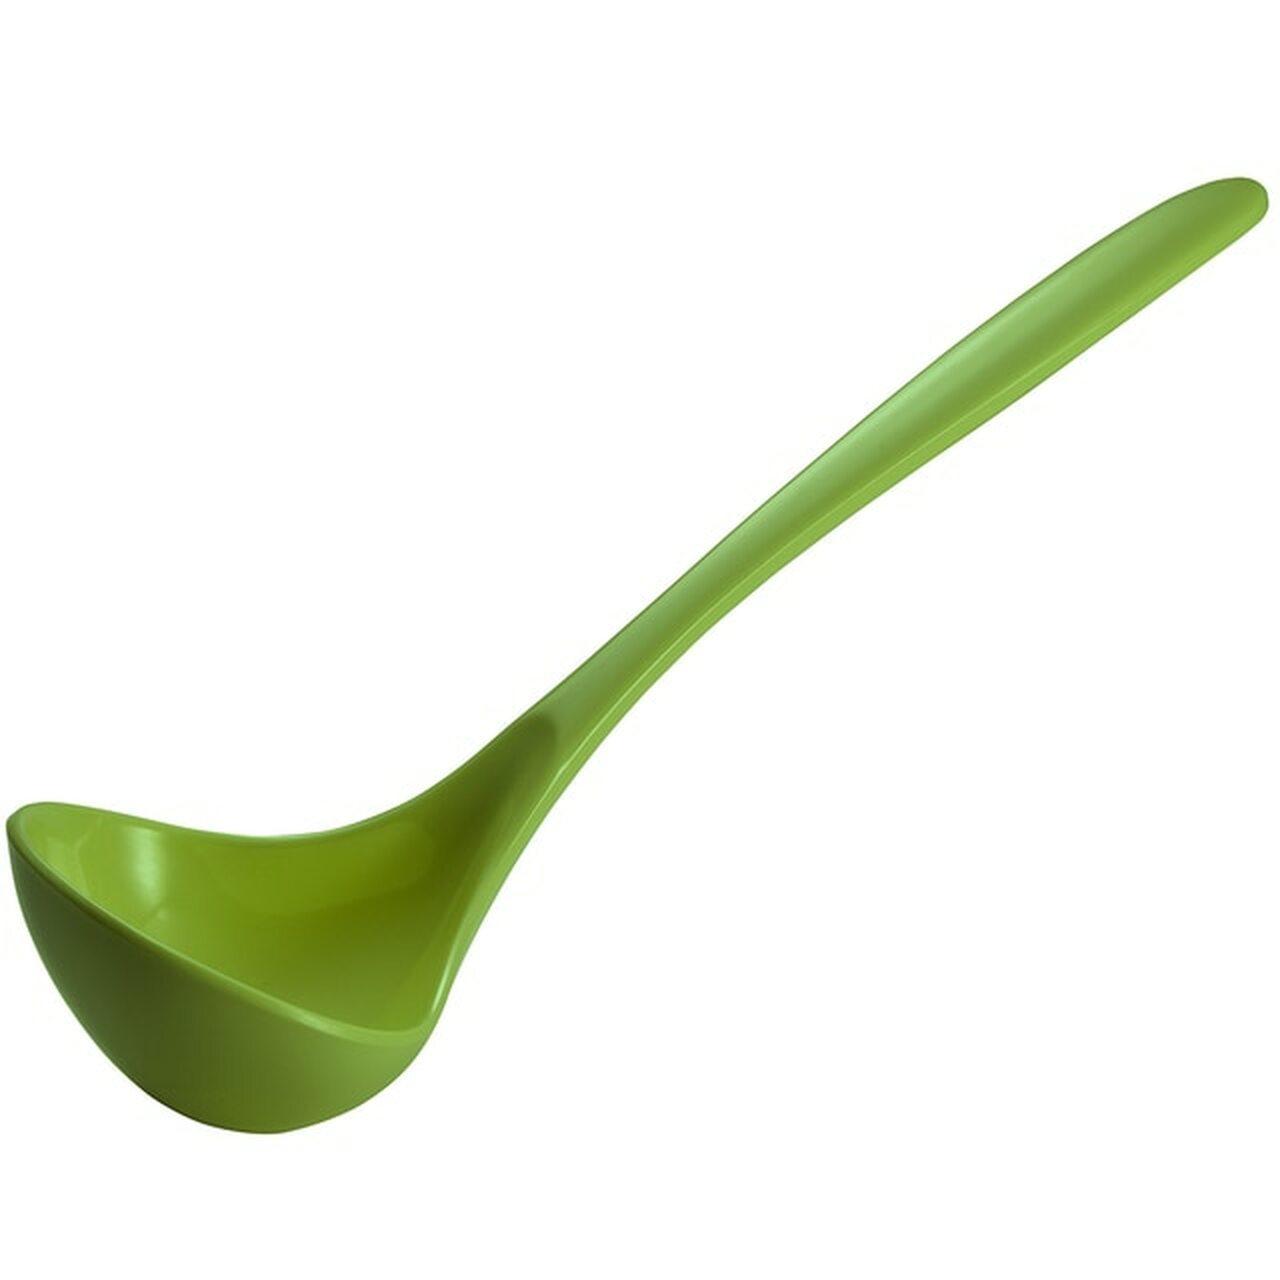 White by Gourmac Melamine Ladle 11 Overall Length 